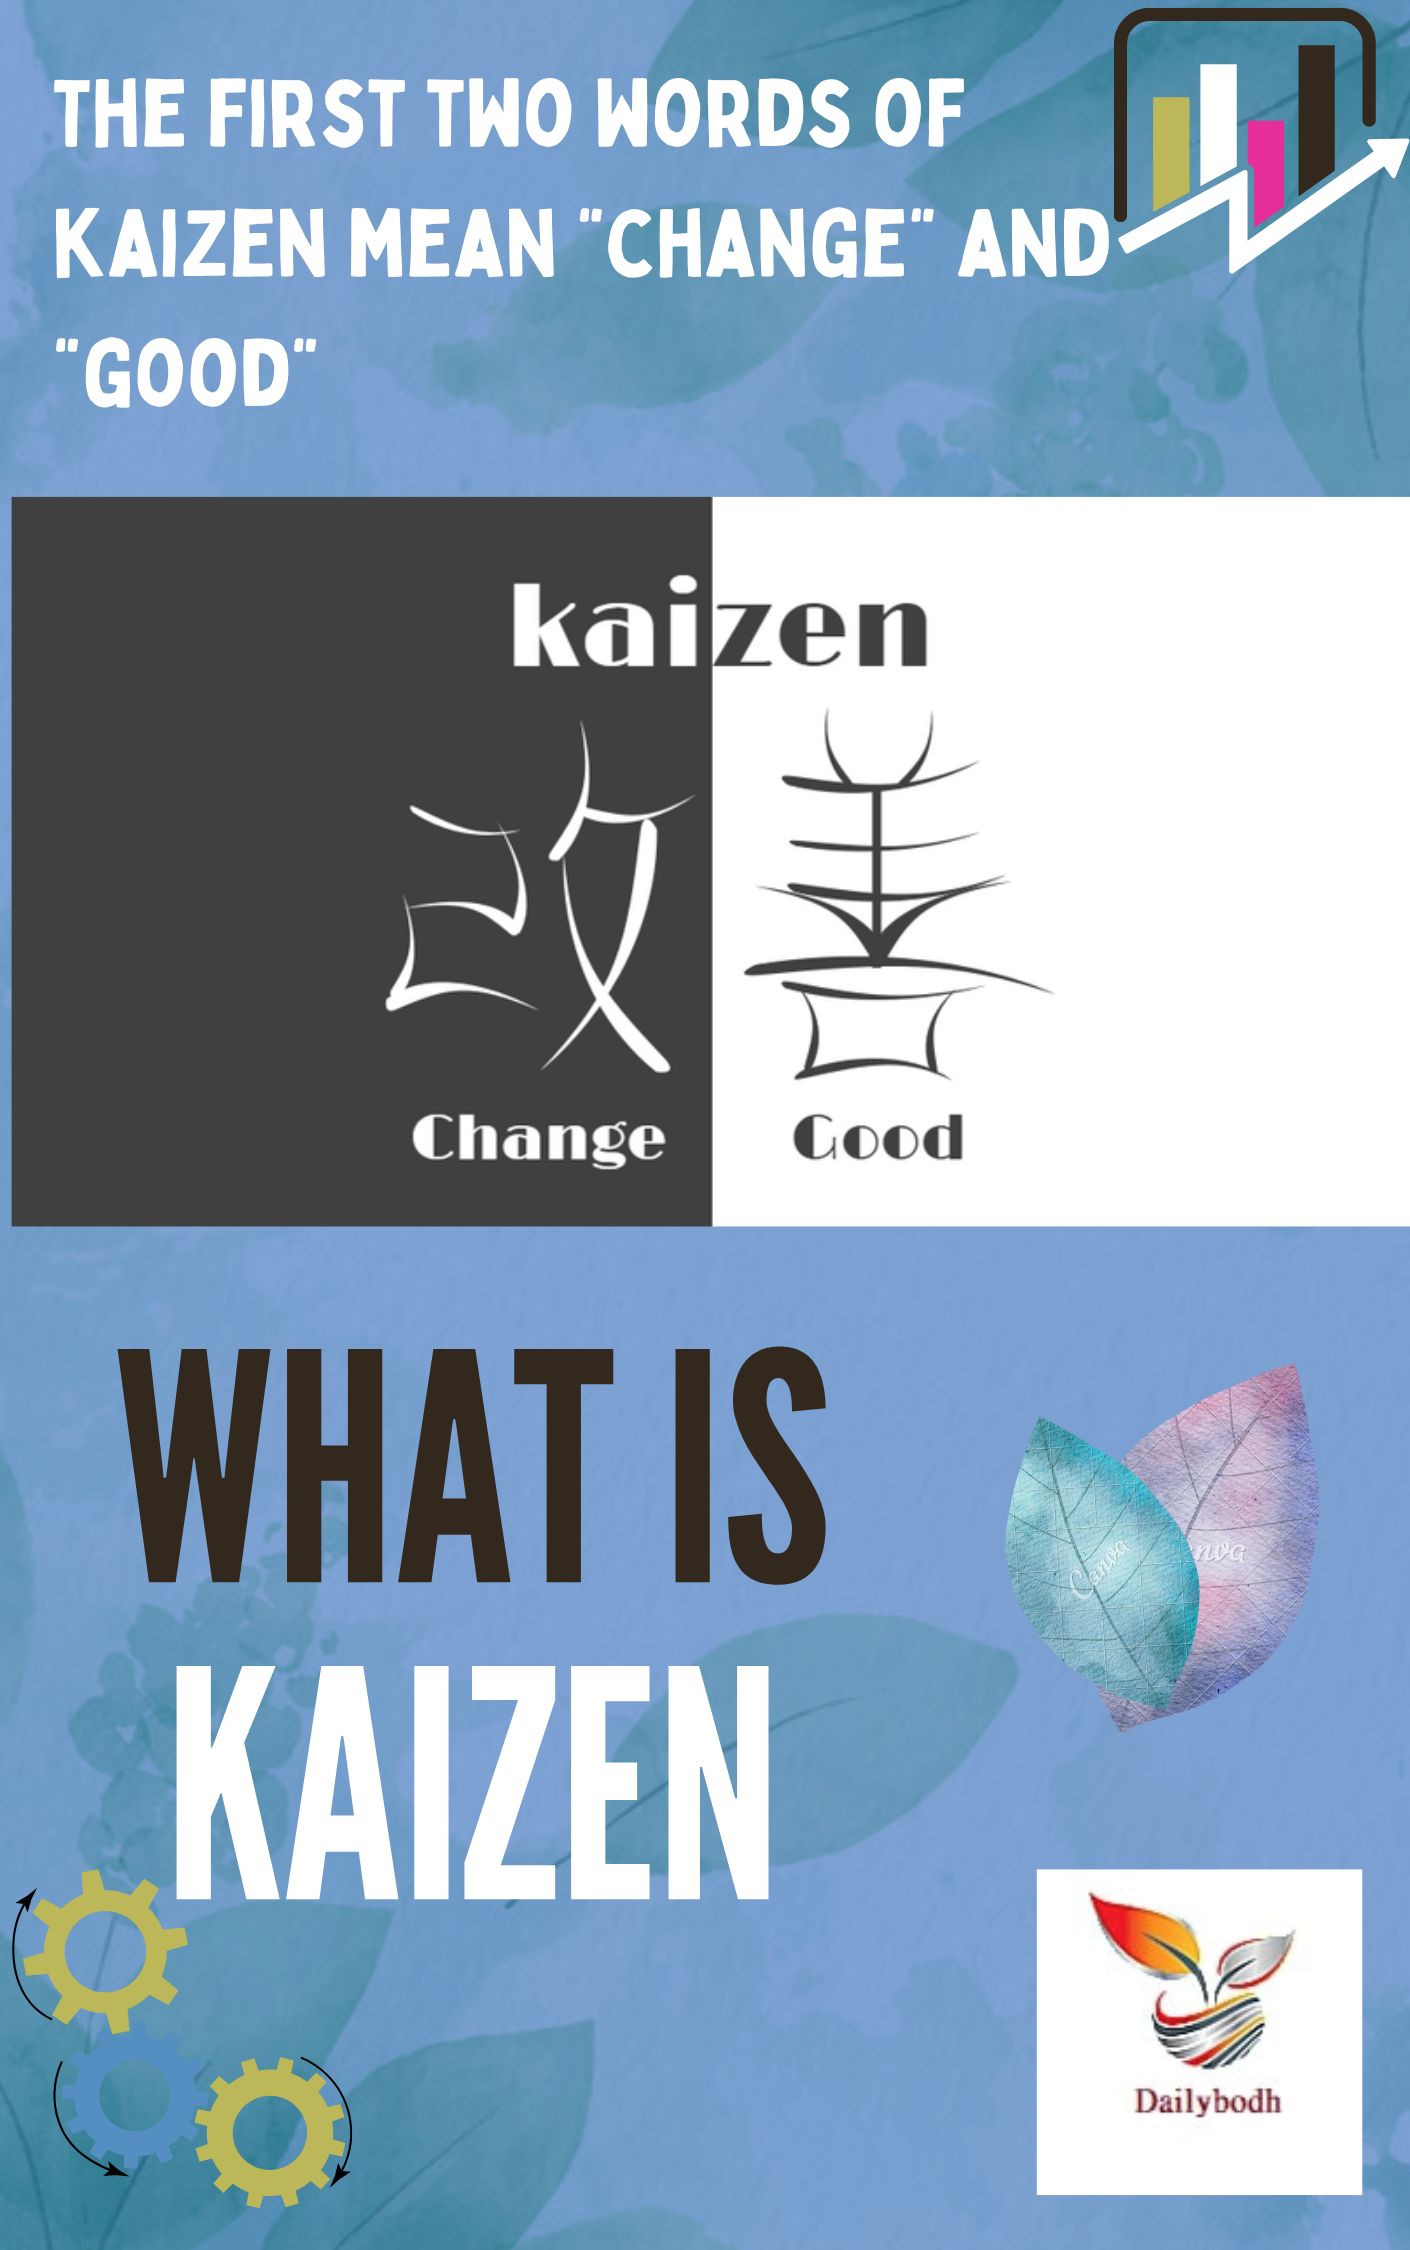 What is kaizen